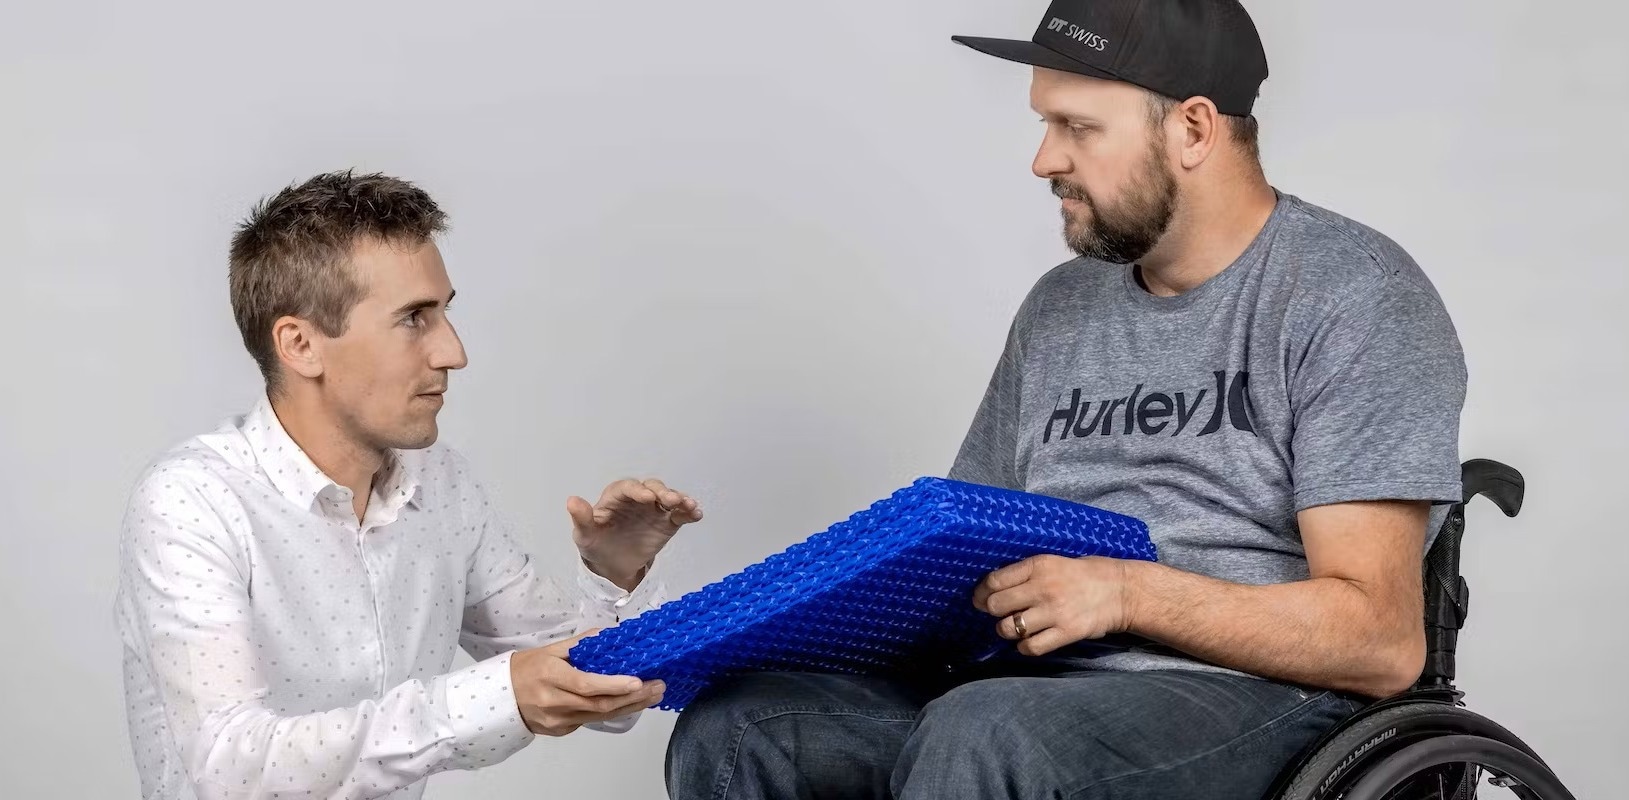 Making Life More Comfortable for Wheelchair-Using Individuals with A 3D-Printed Medical-Grade Cushion